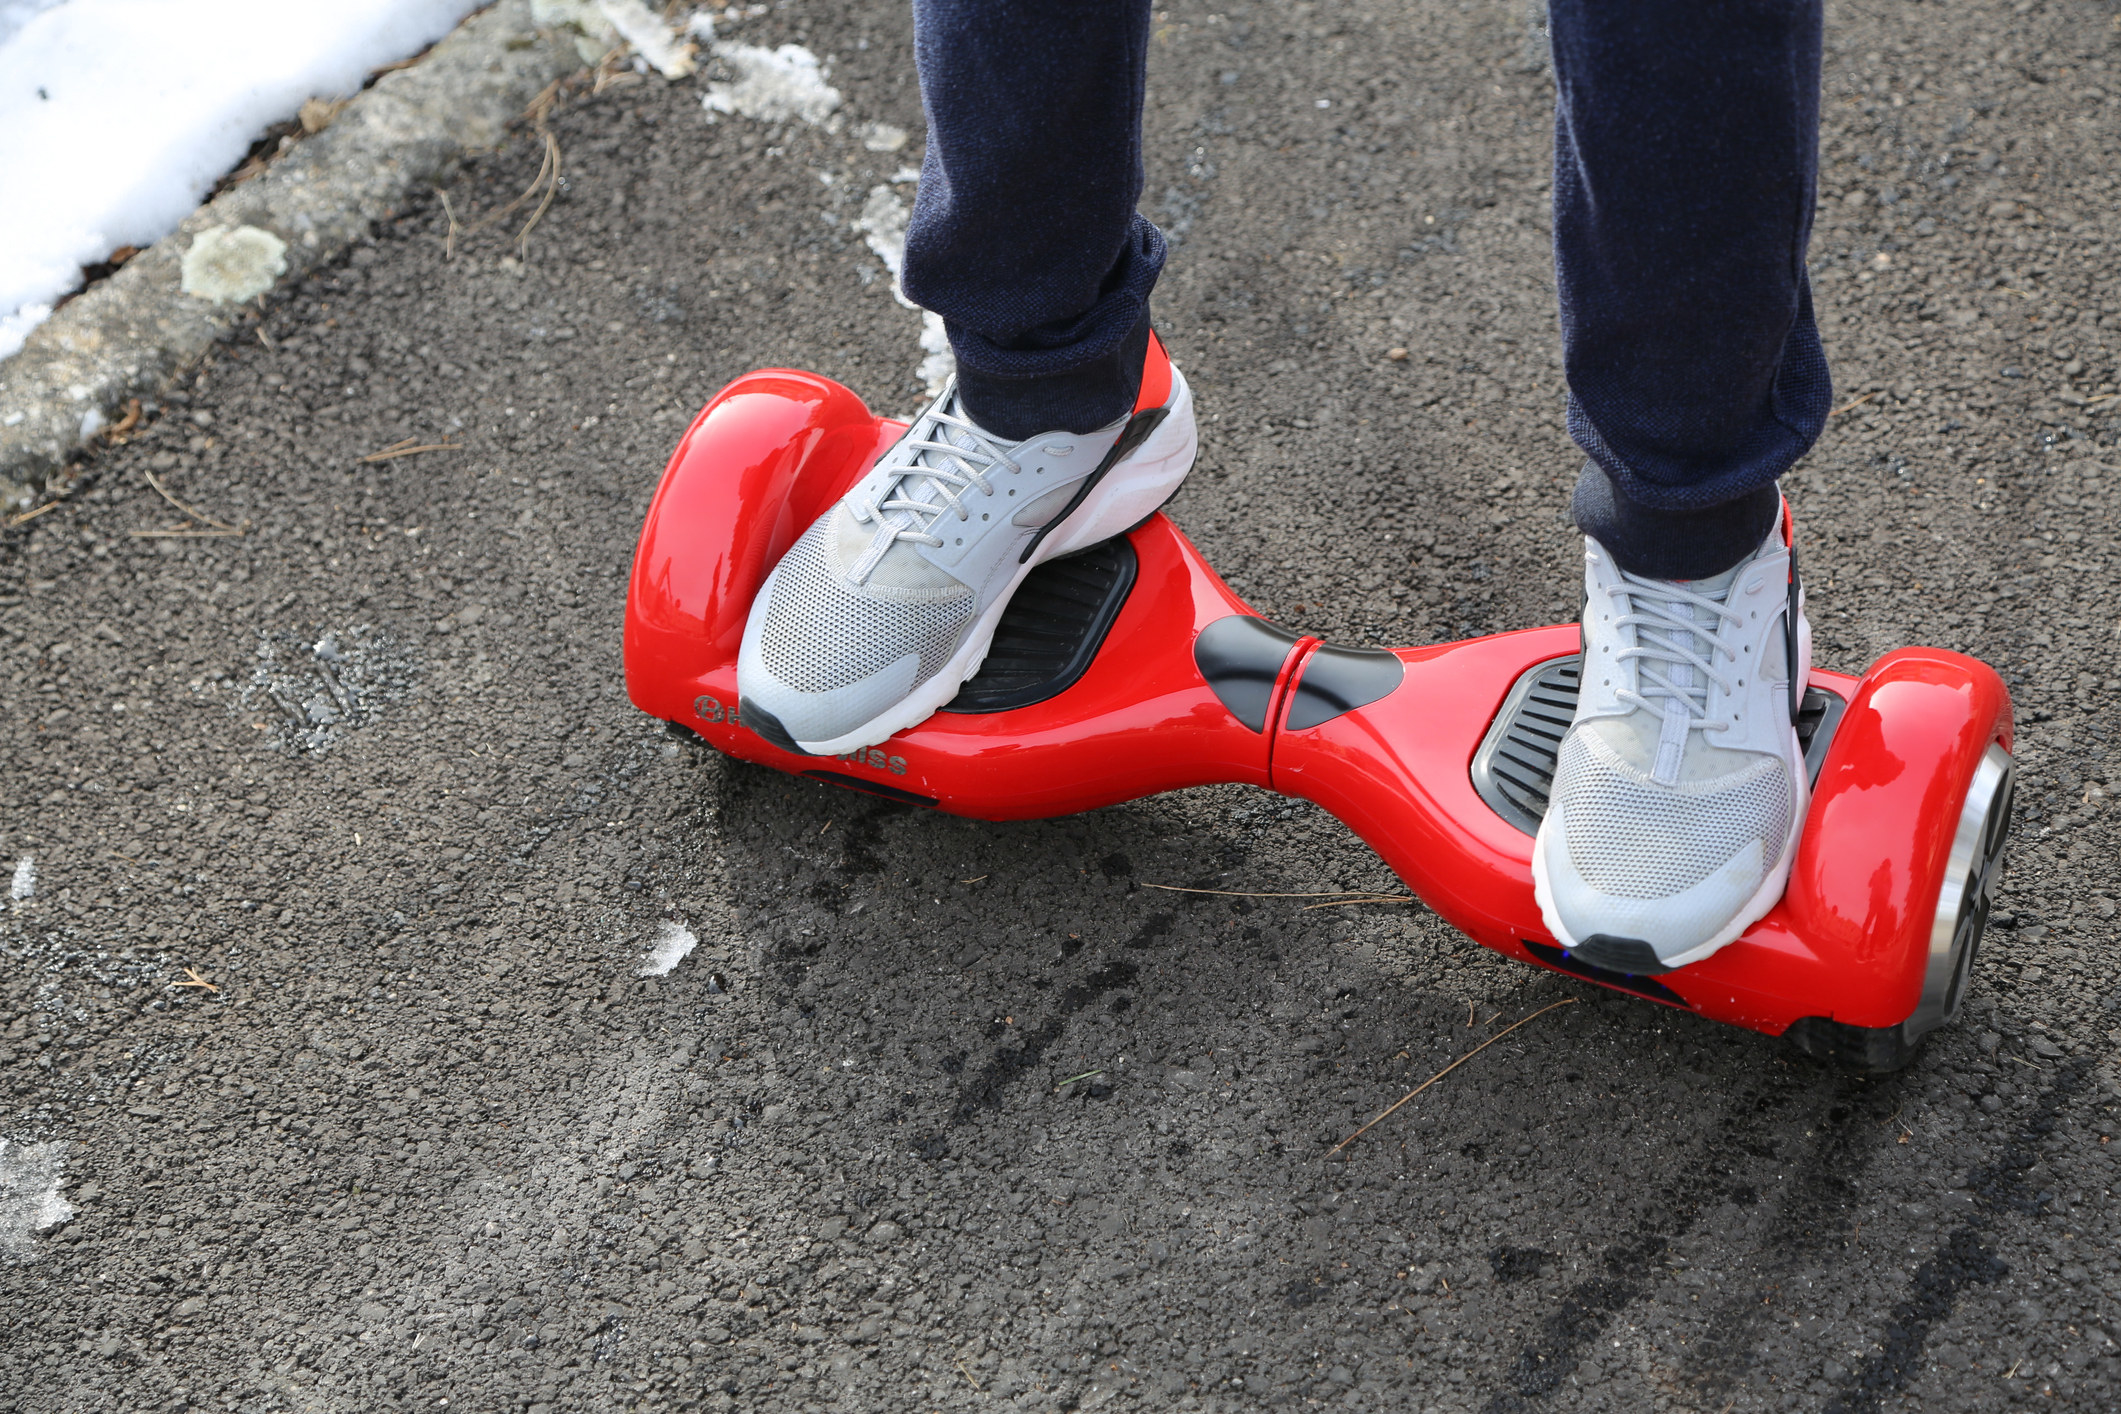 Someone rides a hoverboard outside during winter